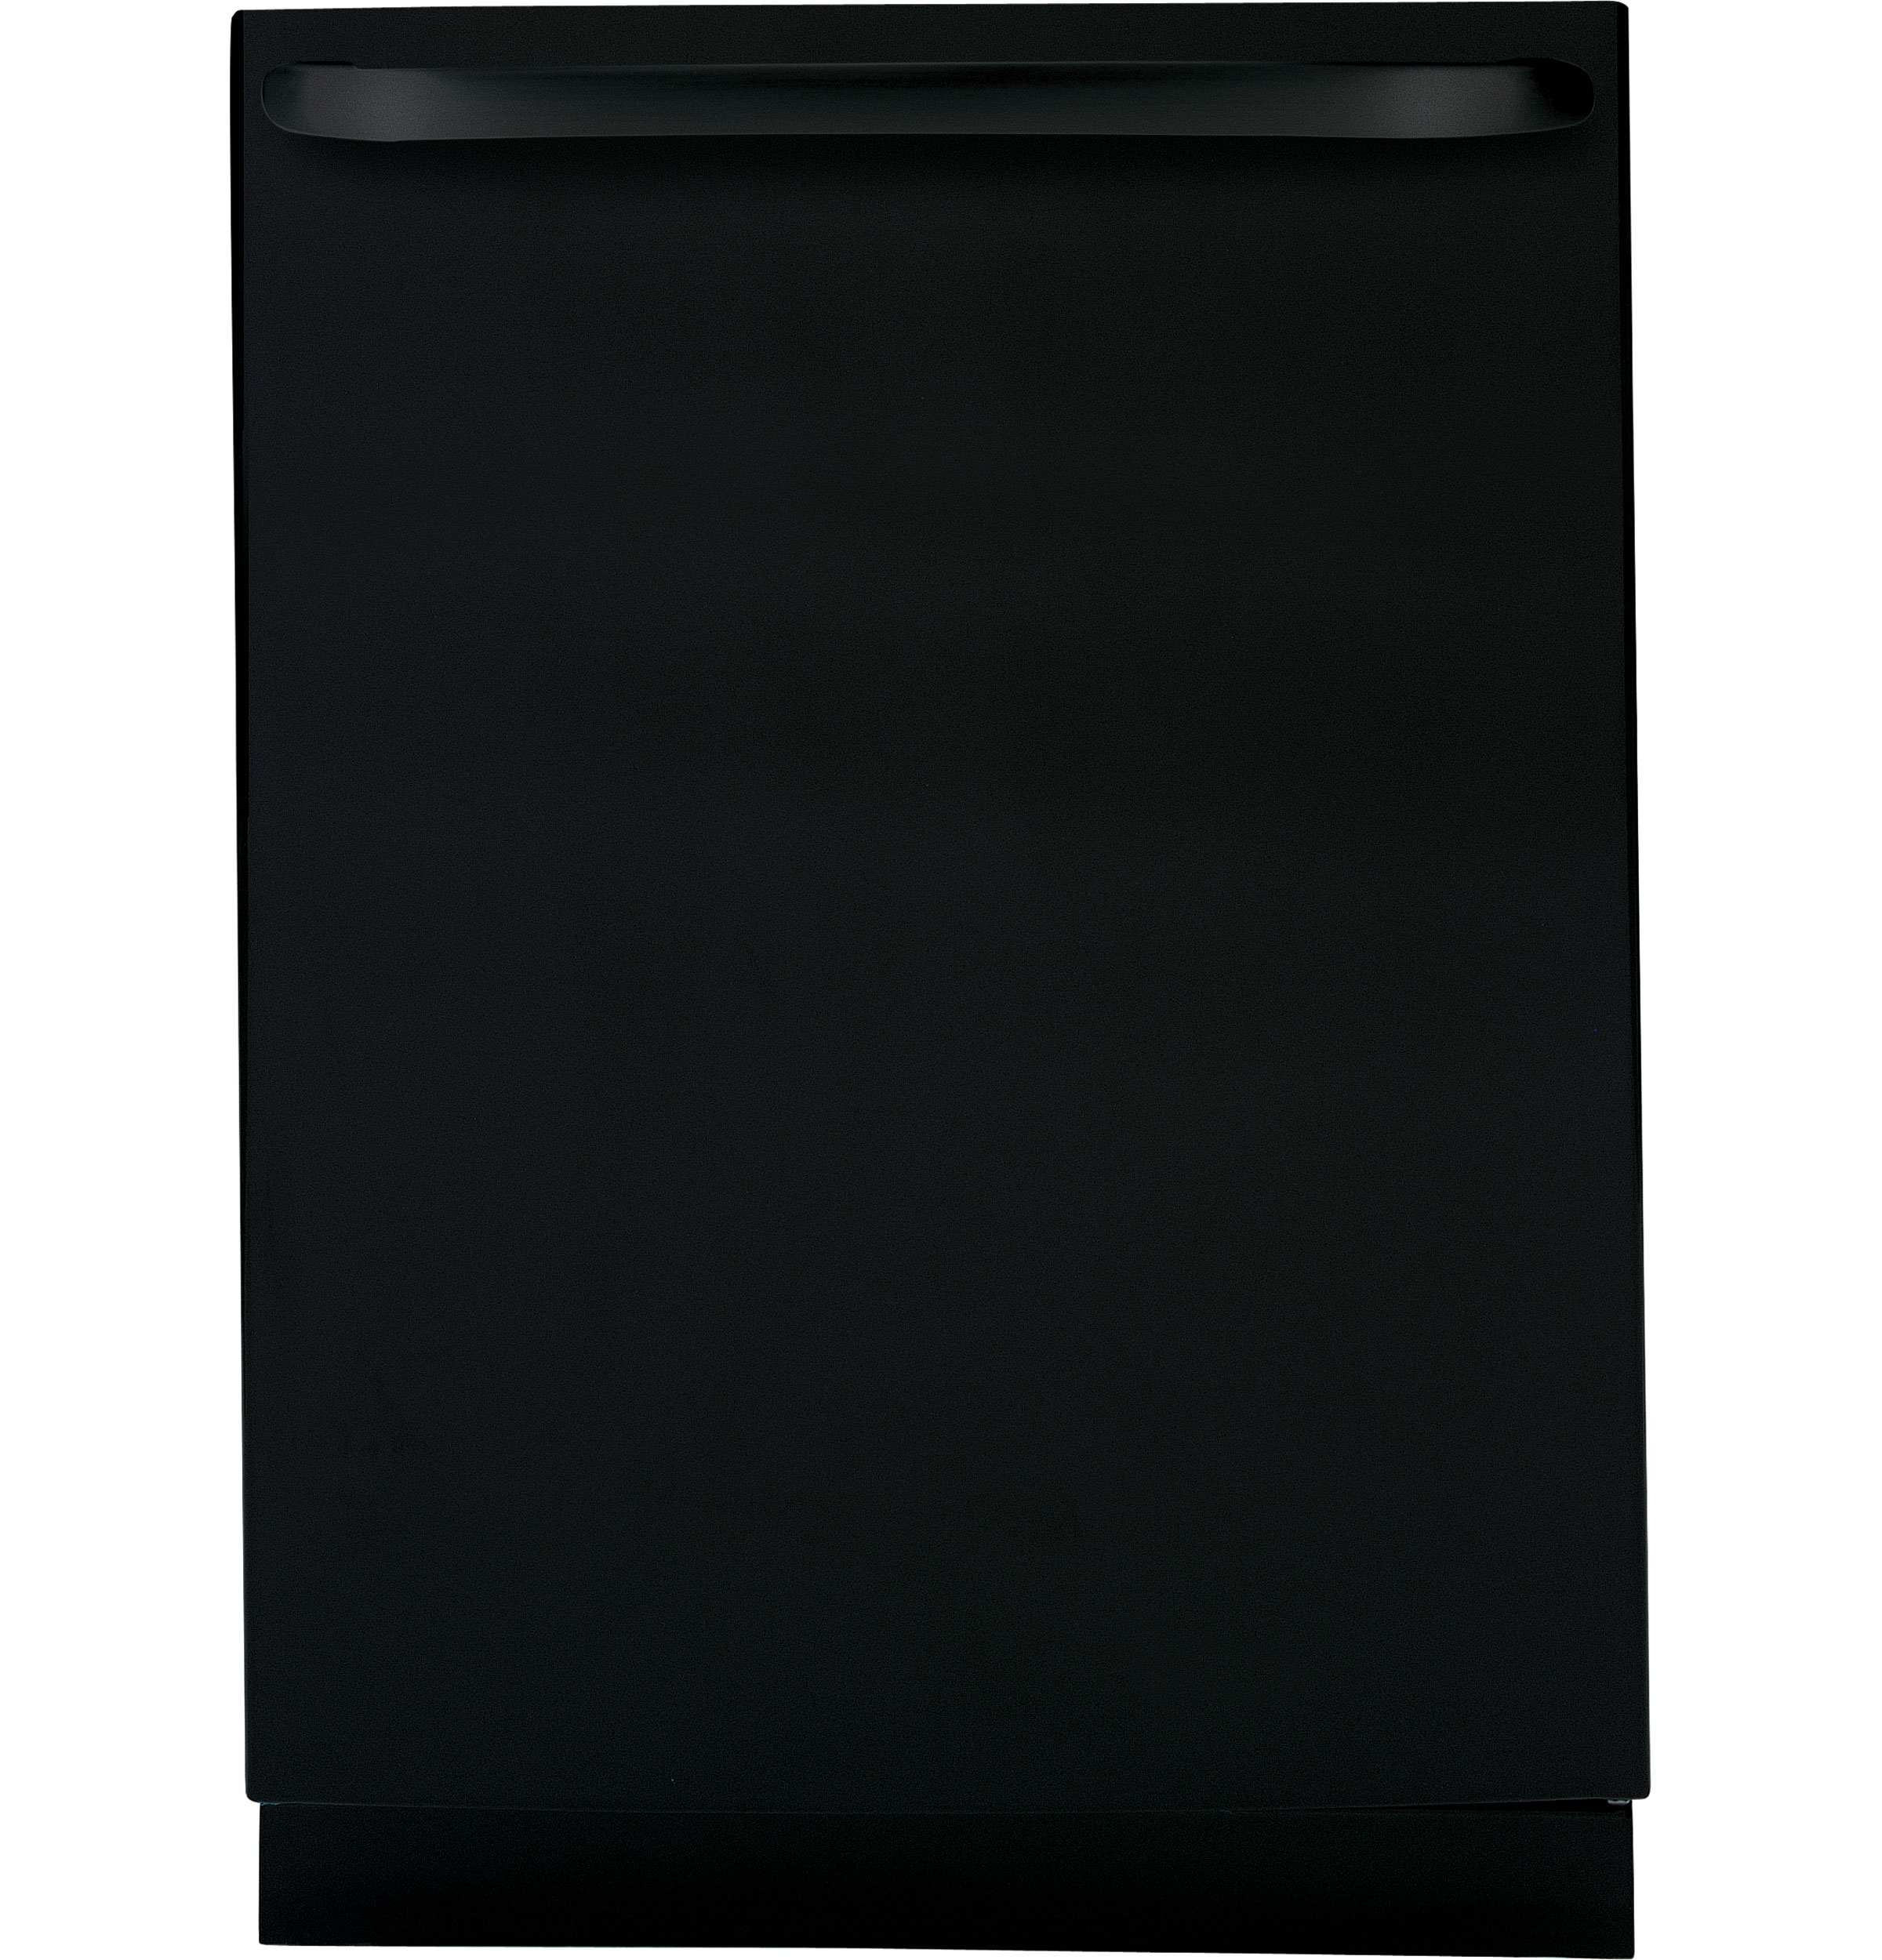 GE® Built-In Dishwasher with Hidden Controls